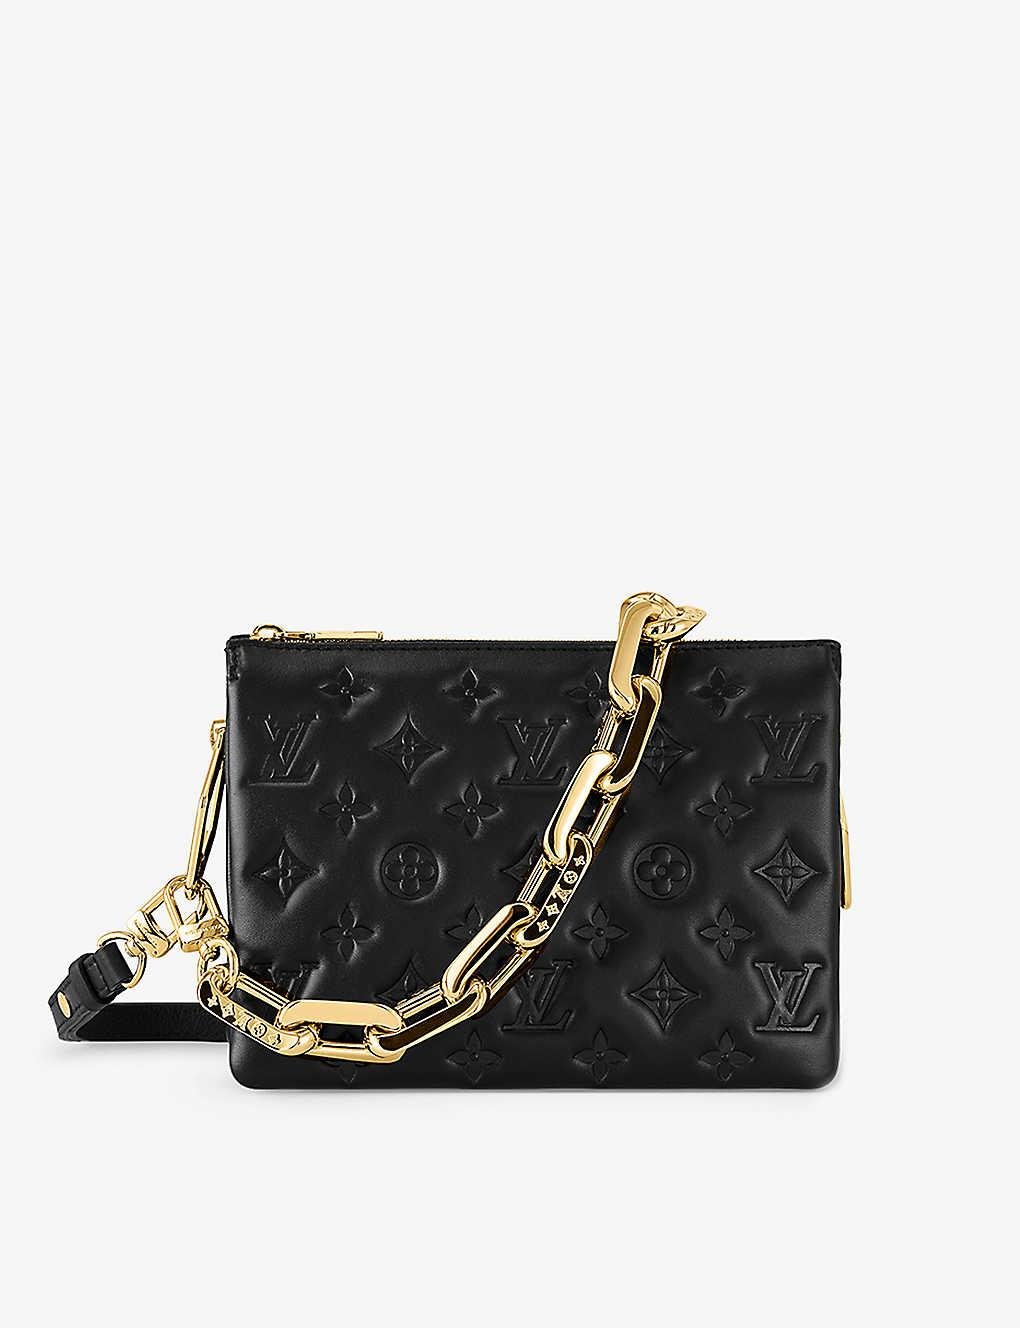 louis vuitton cross body with chain